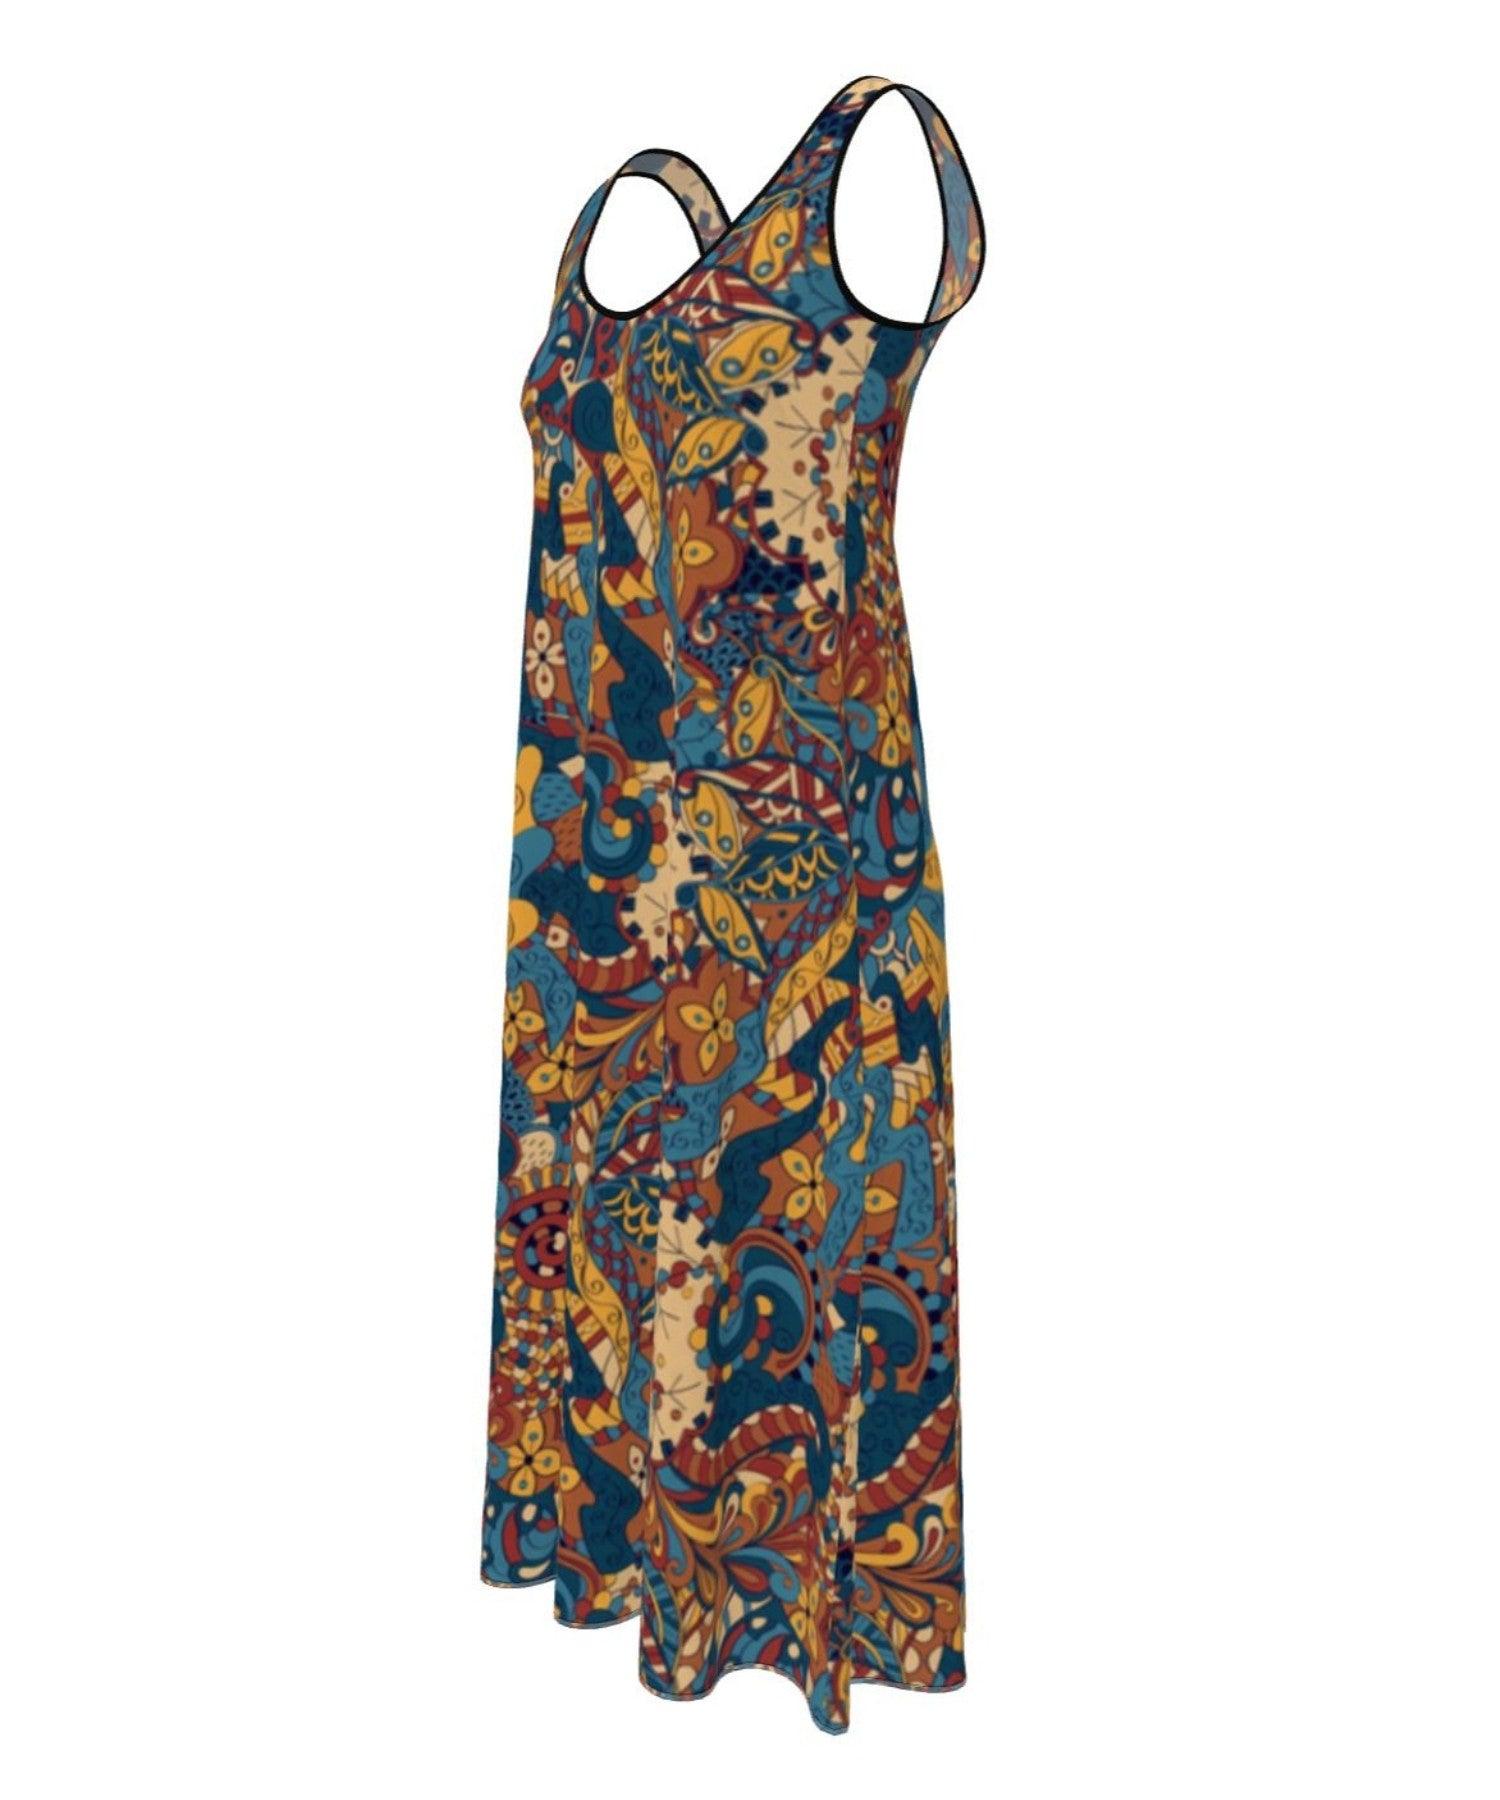 Kuri Sleeveless Midi Crepe Dress - Abstract Floral Print with Round Neck with Low Cut Back